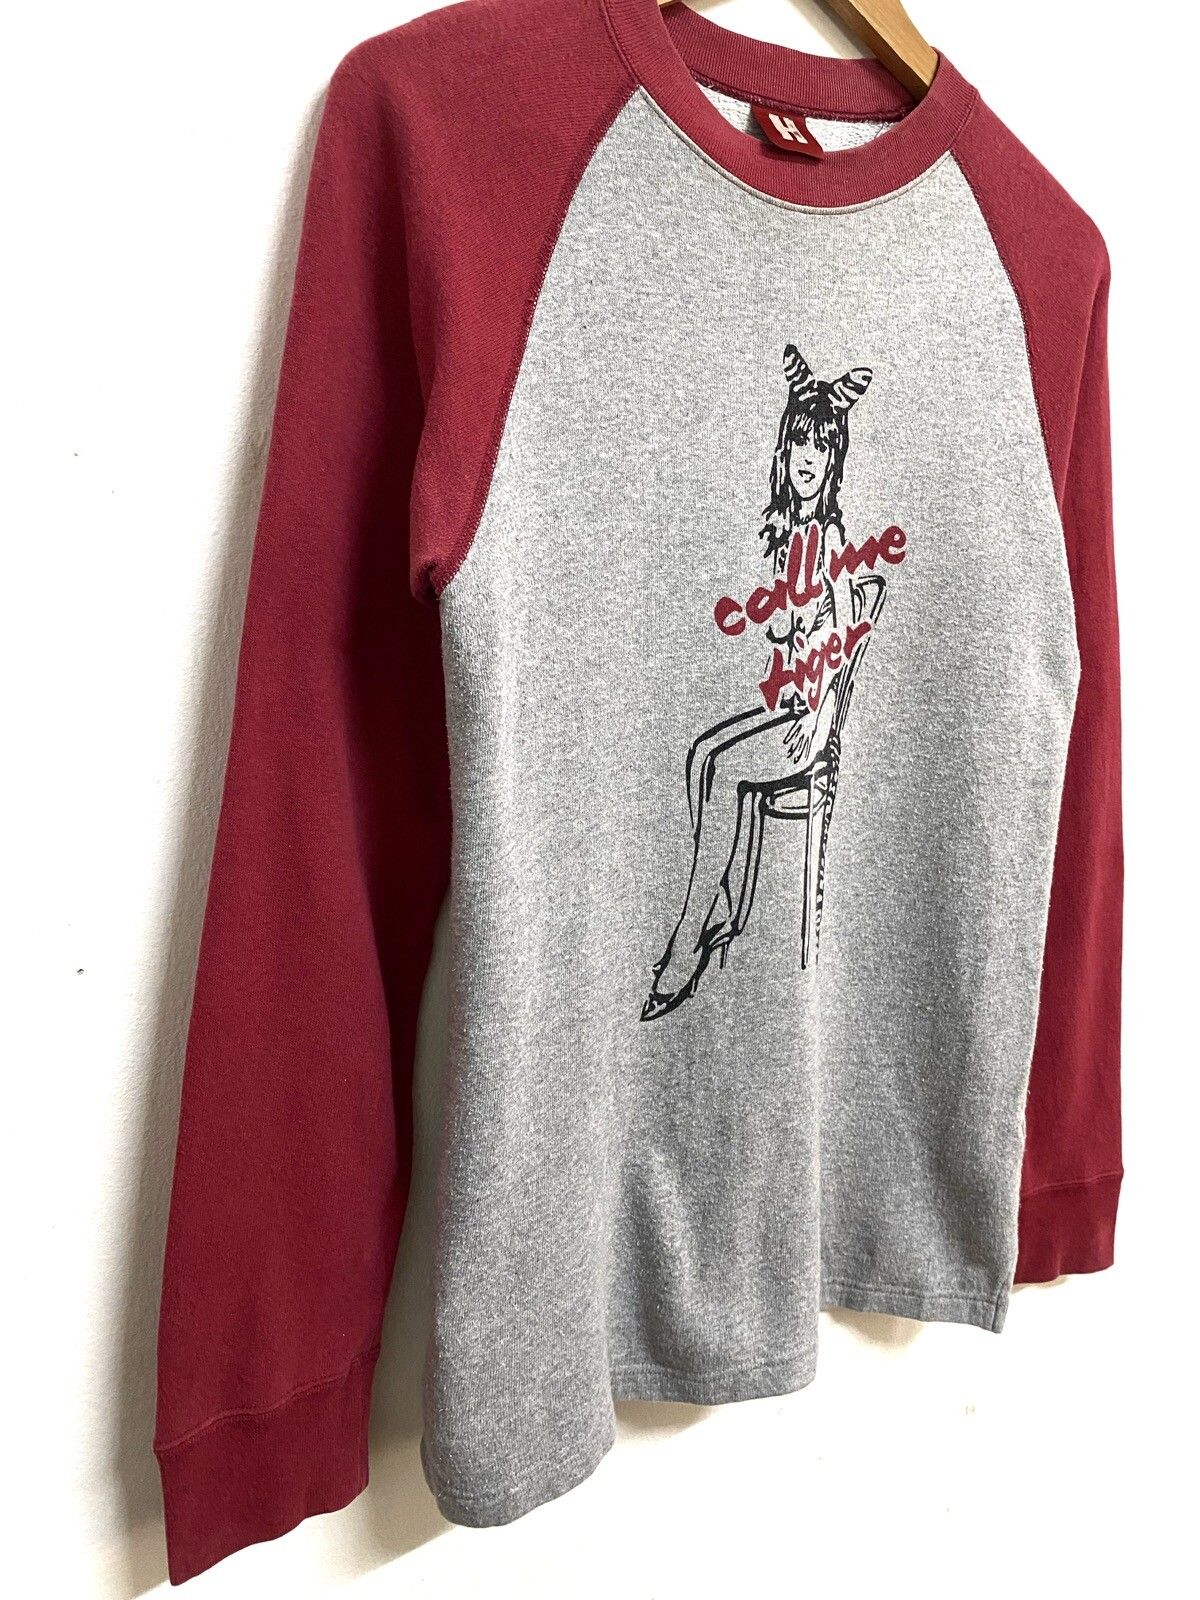 Hysteric Glamour Call Me Tiger Show Girl Trainer Sweatshirt - 2